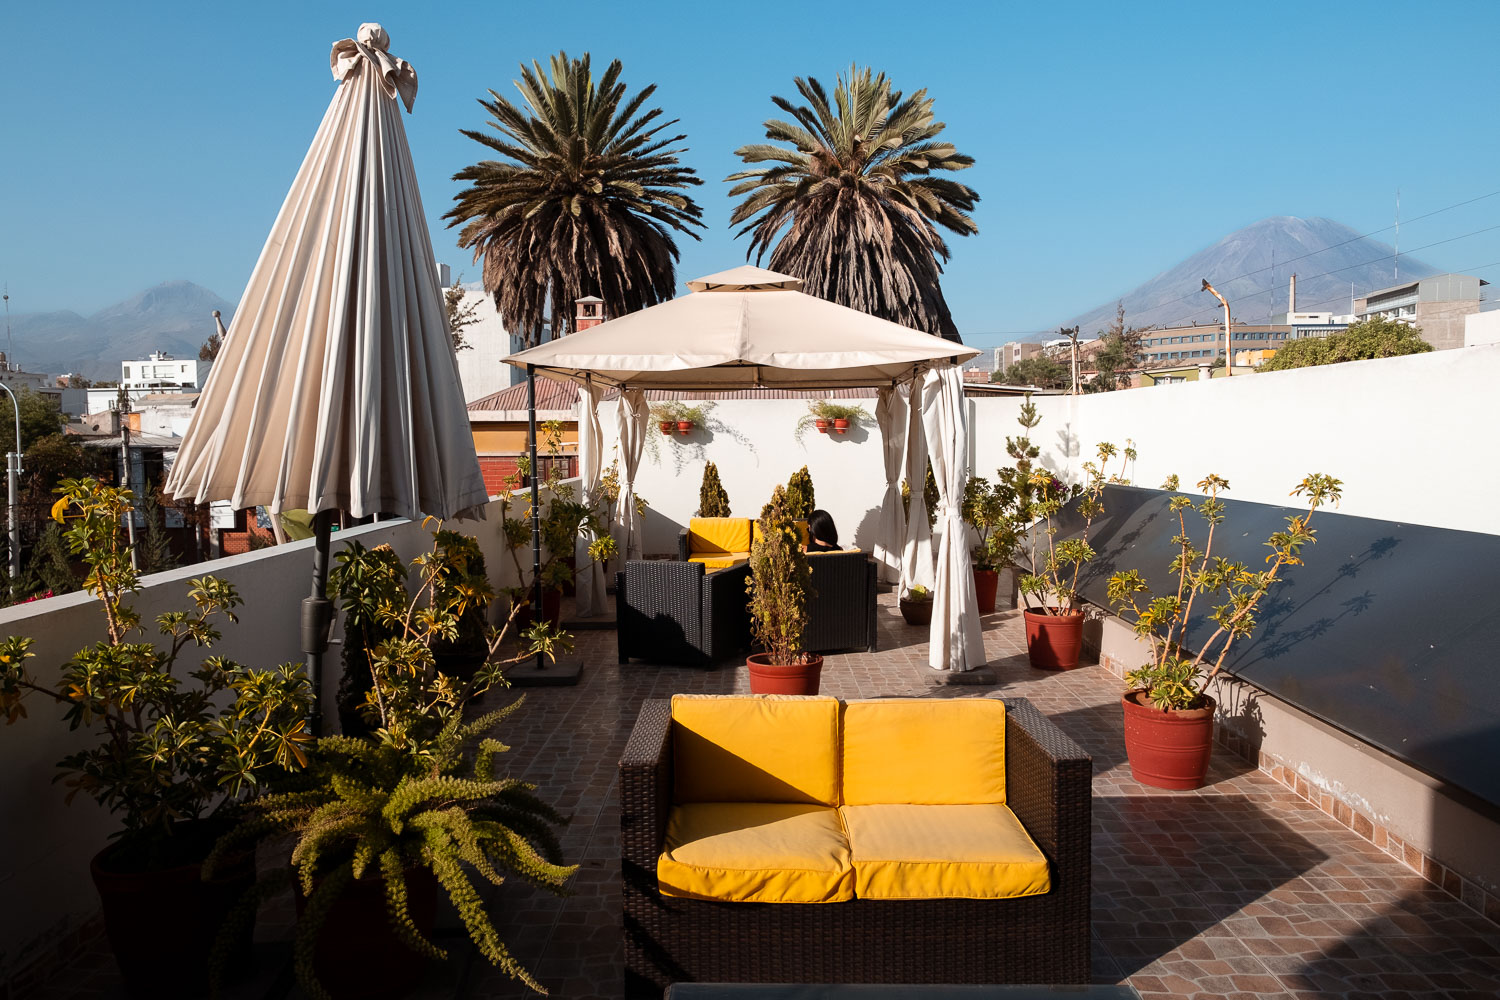 Rooftop of Beausejour Boutique Hotel Arequipa, Peru. Travel photography and guide by © Natasha Lequepeys for "And Then I Met Yoko". #peru #photoblog #fujifilm